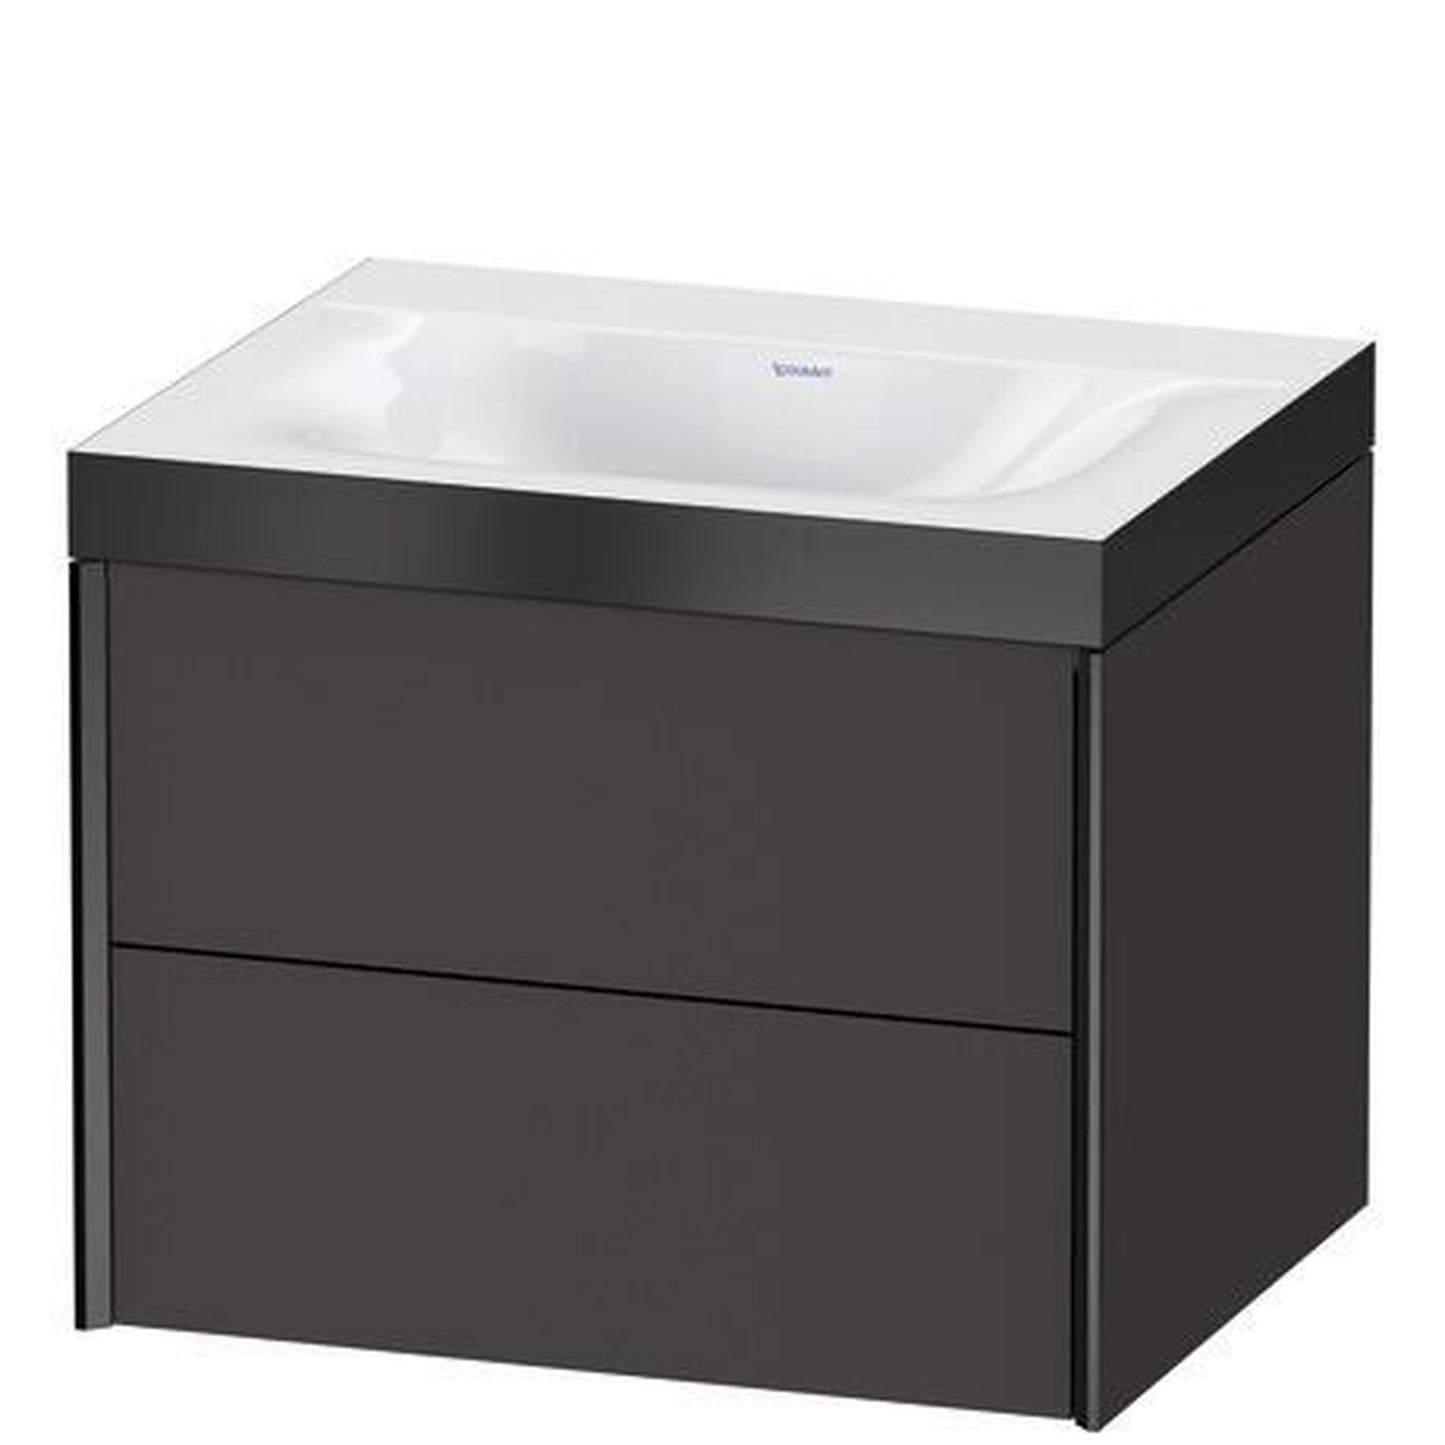 Duravit Xviu 24" x 20" x 19" Two Drawer C-Bonded Wall-Mount Vanity Kit Without Tap Hole, Graphite (XV4614NB280P)